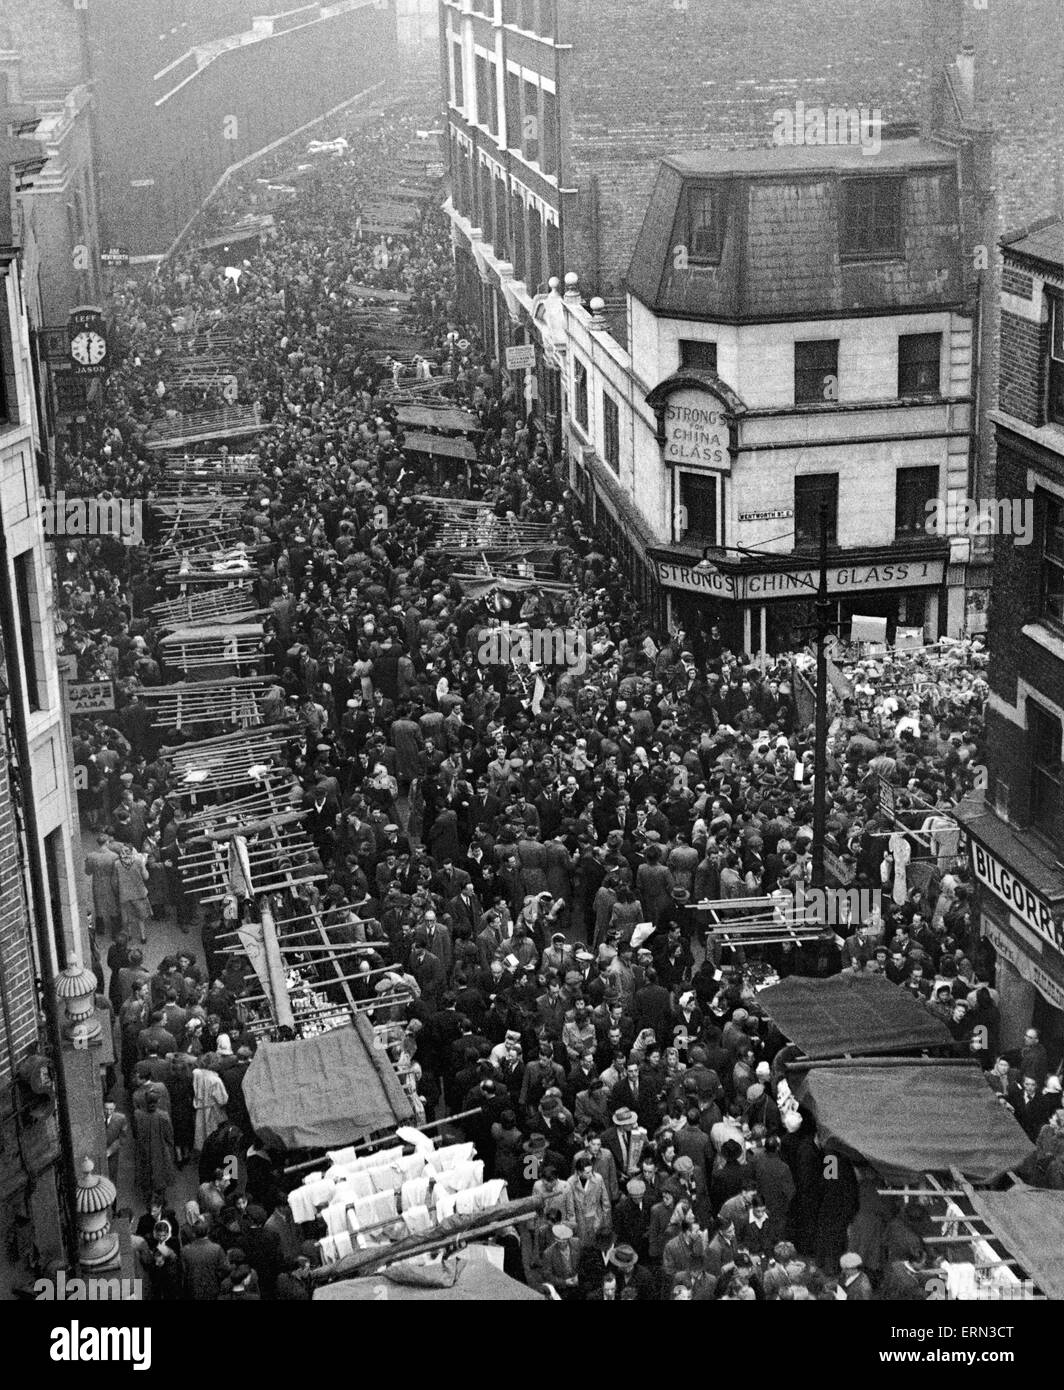 Crowds besieged Petticoat lane to buy their Christmas presents and as usual developed into a milling throng. Every conceivable item was on sale including baked chestnuts, ice cream, sleeping dolls and rat traps. A band of blind musicians were playing Chri Stock Photo